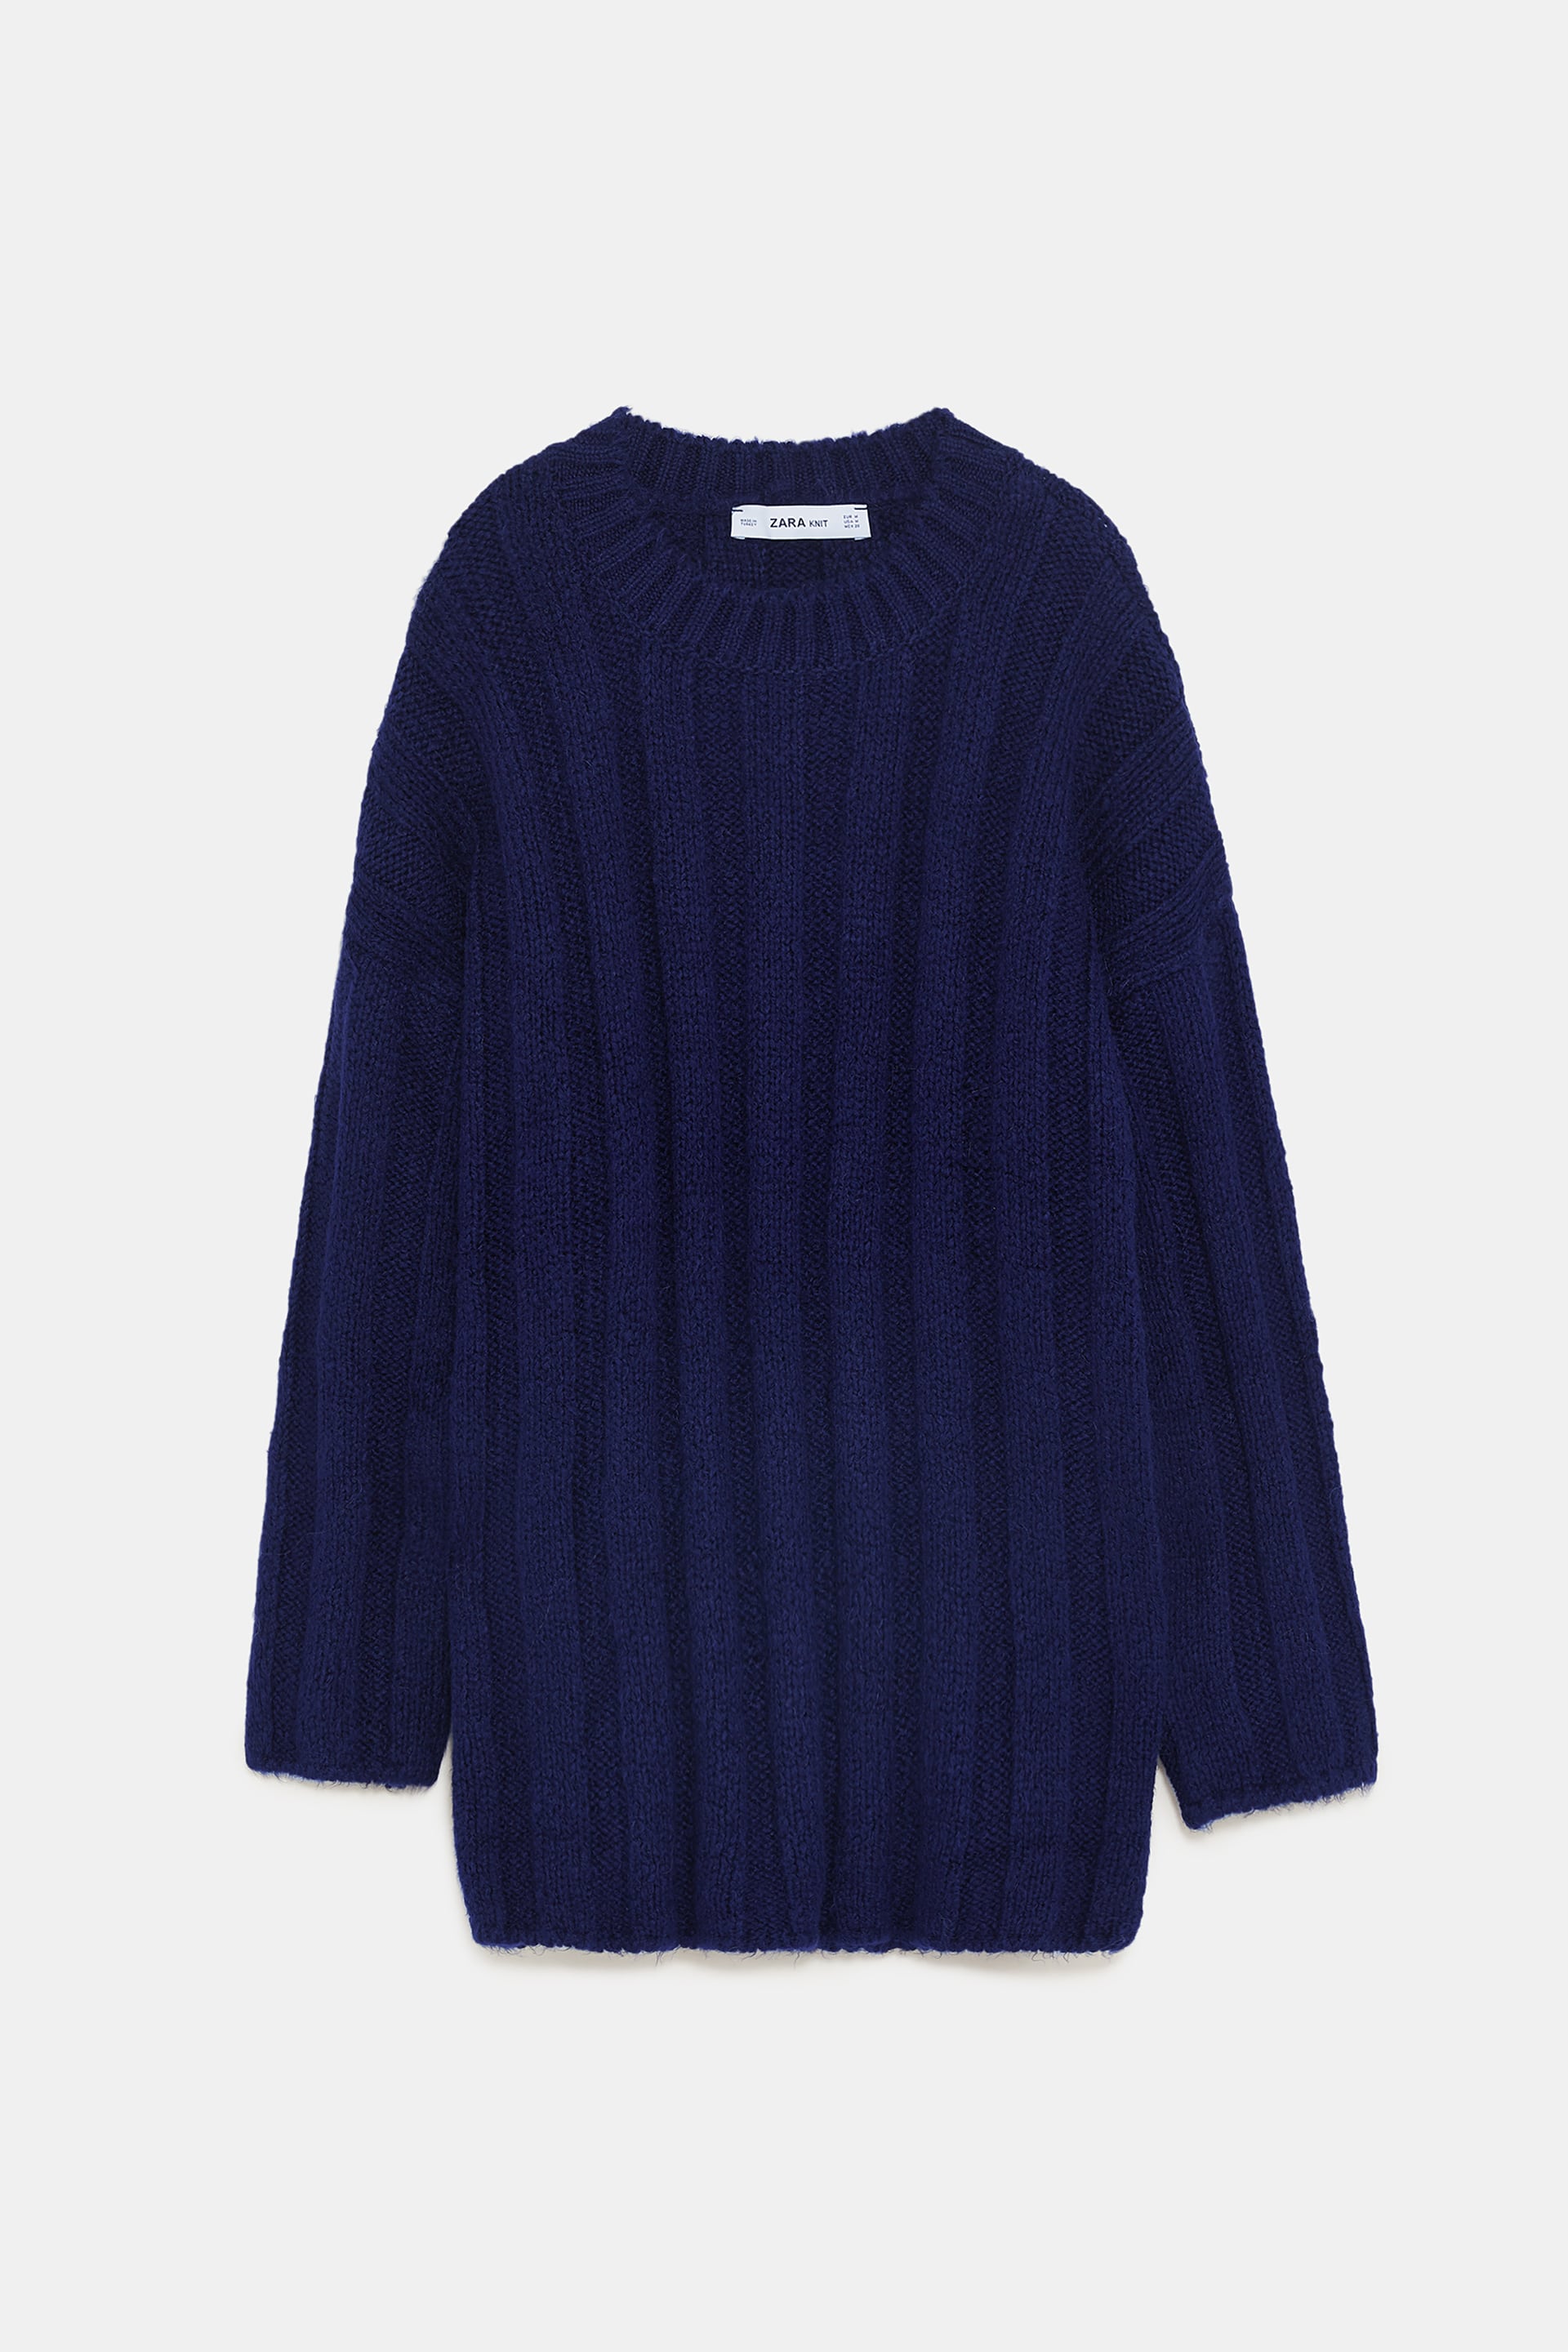 17 Oversize Sweaters to Lose Yourself In | Who What Wear